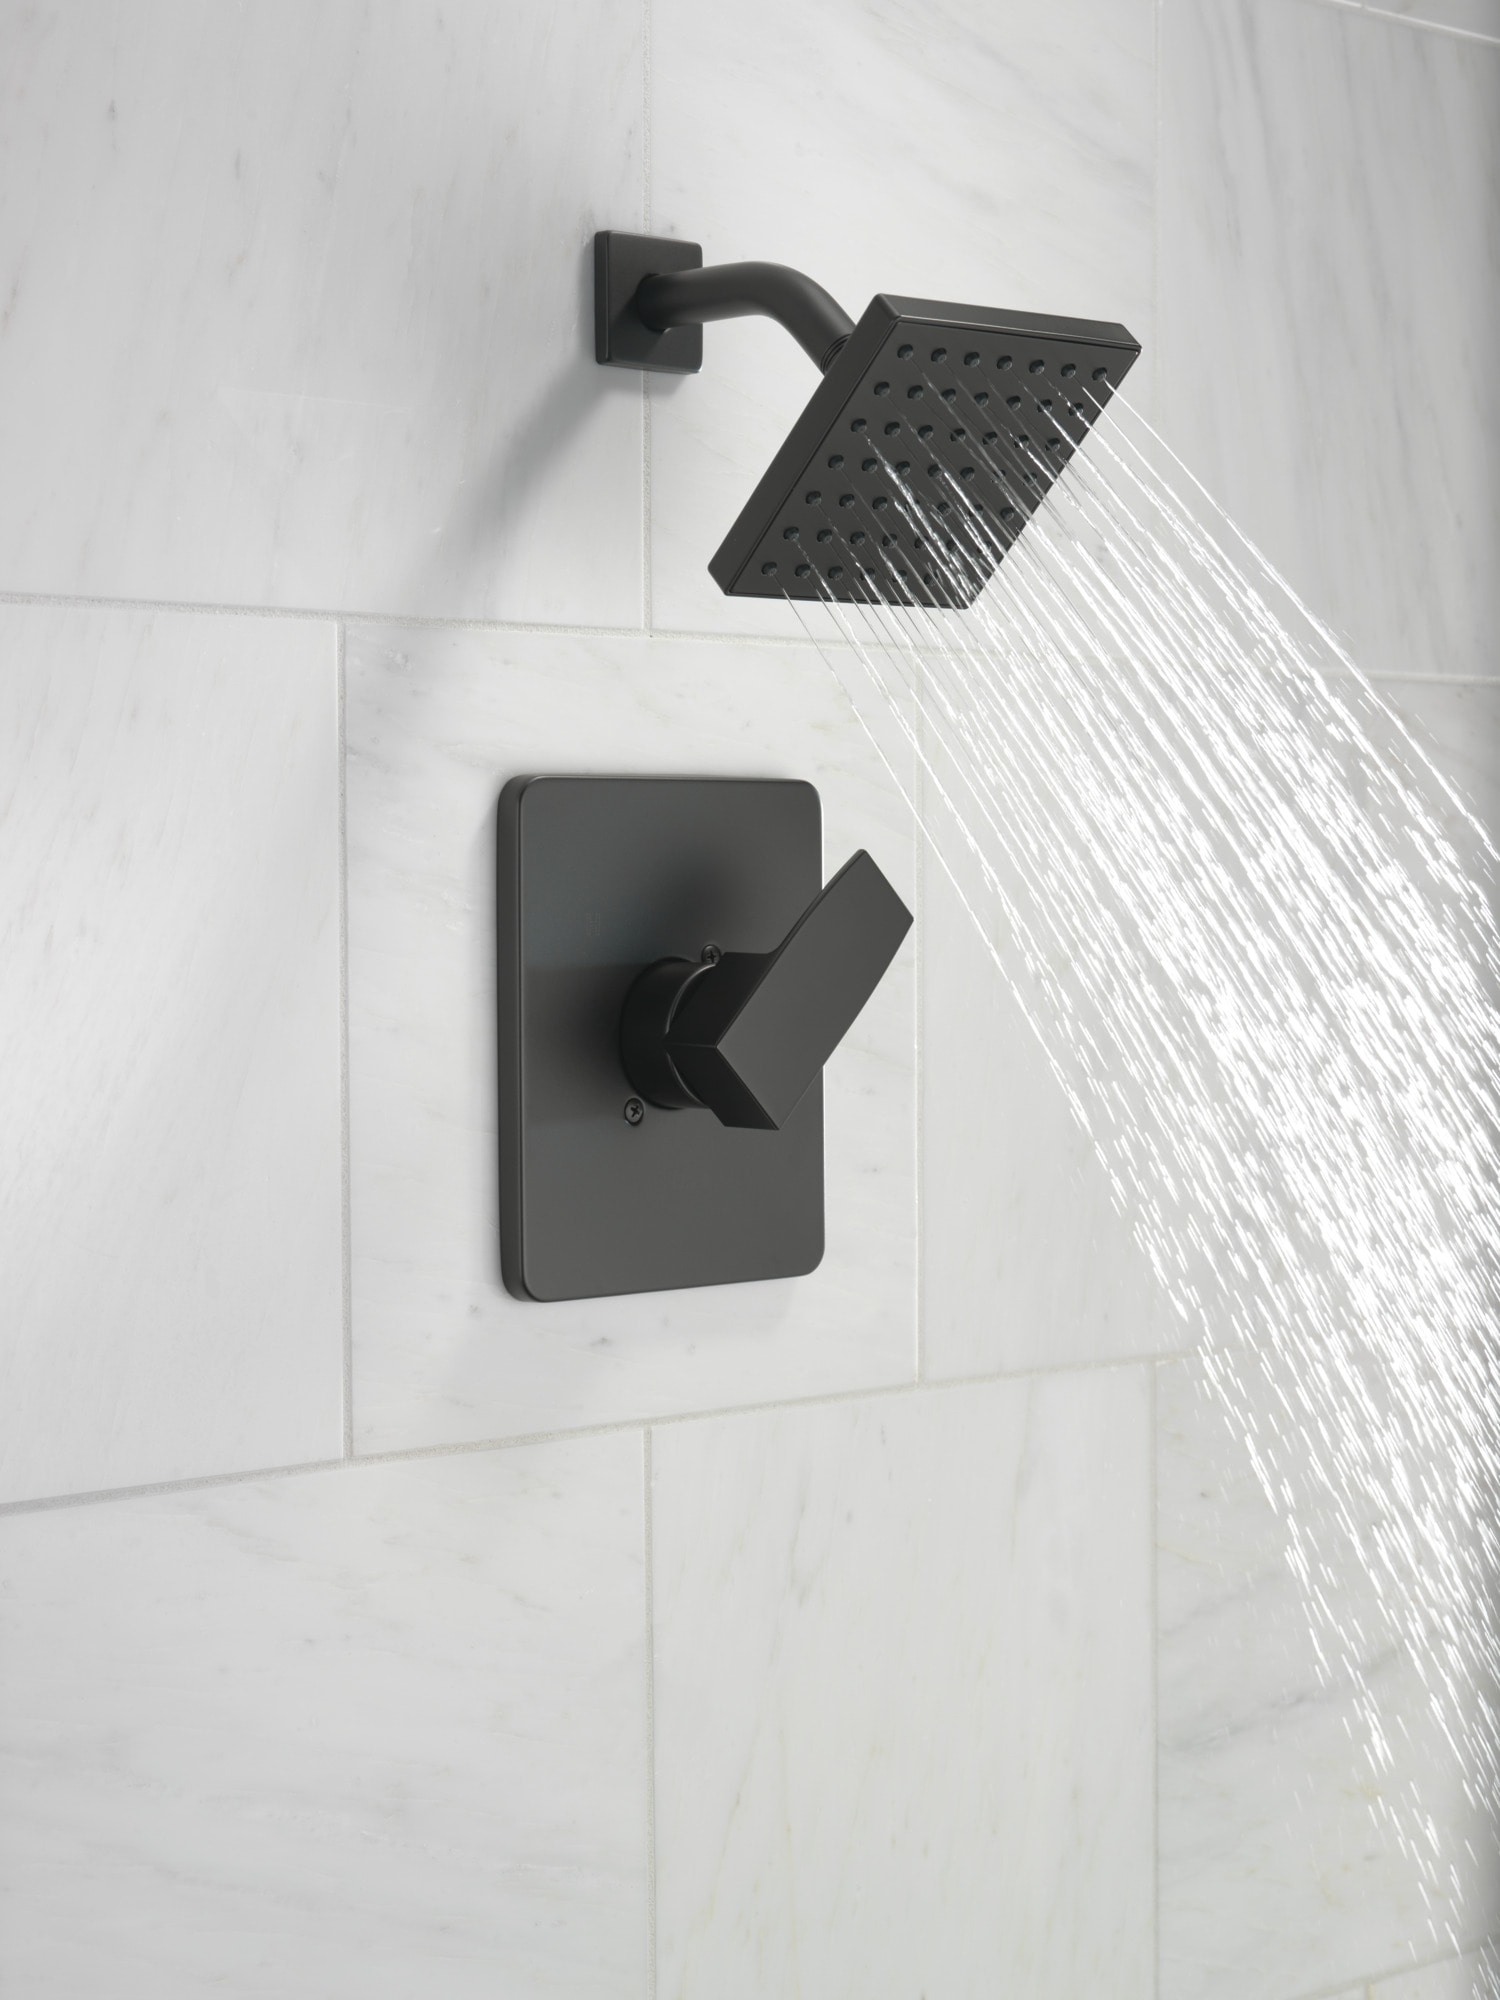 the matte black shower faucet and handle